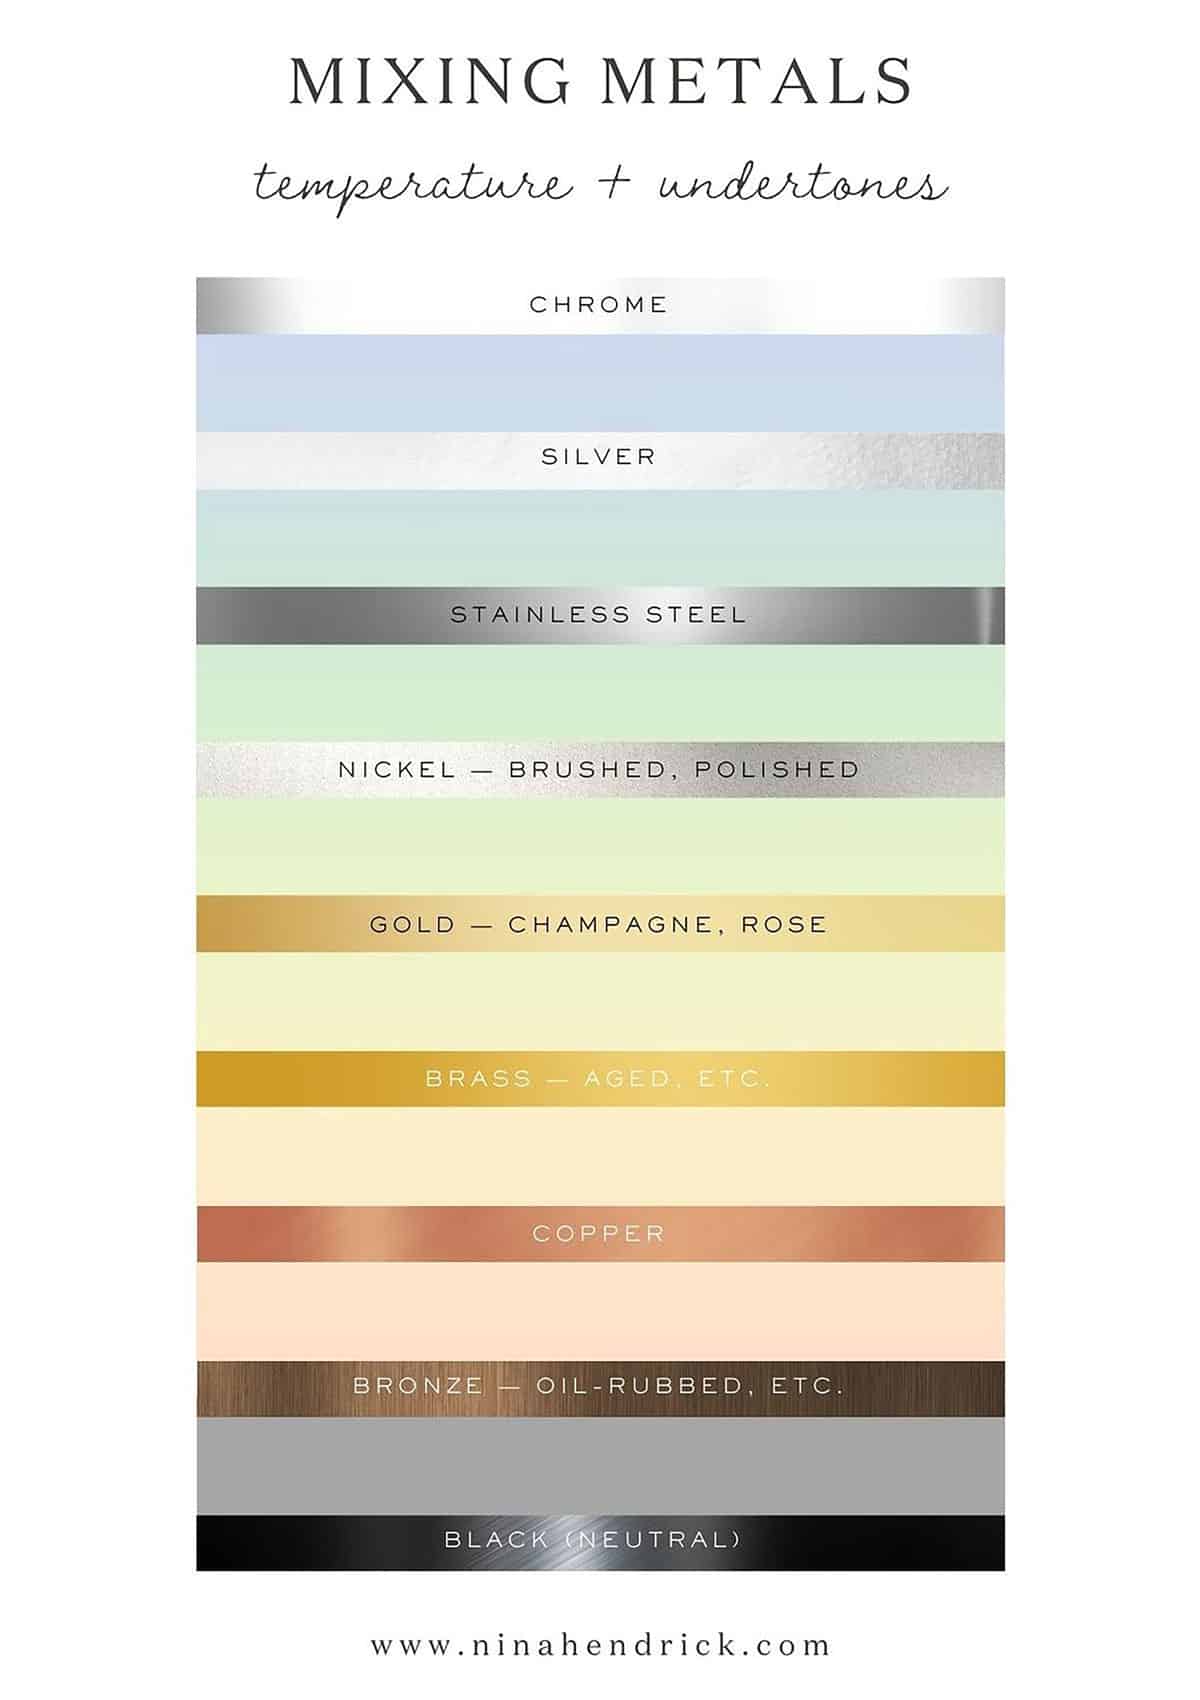 Chart with the temperature and undertones of common finishes to help you with mixing metals.